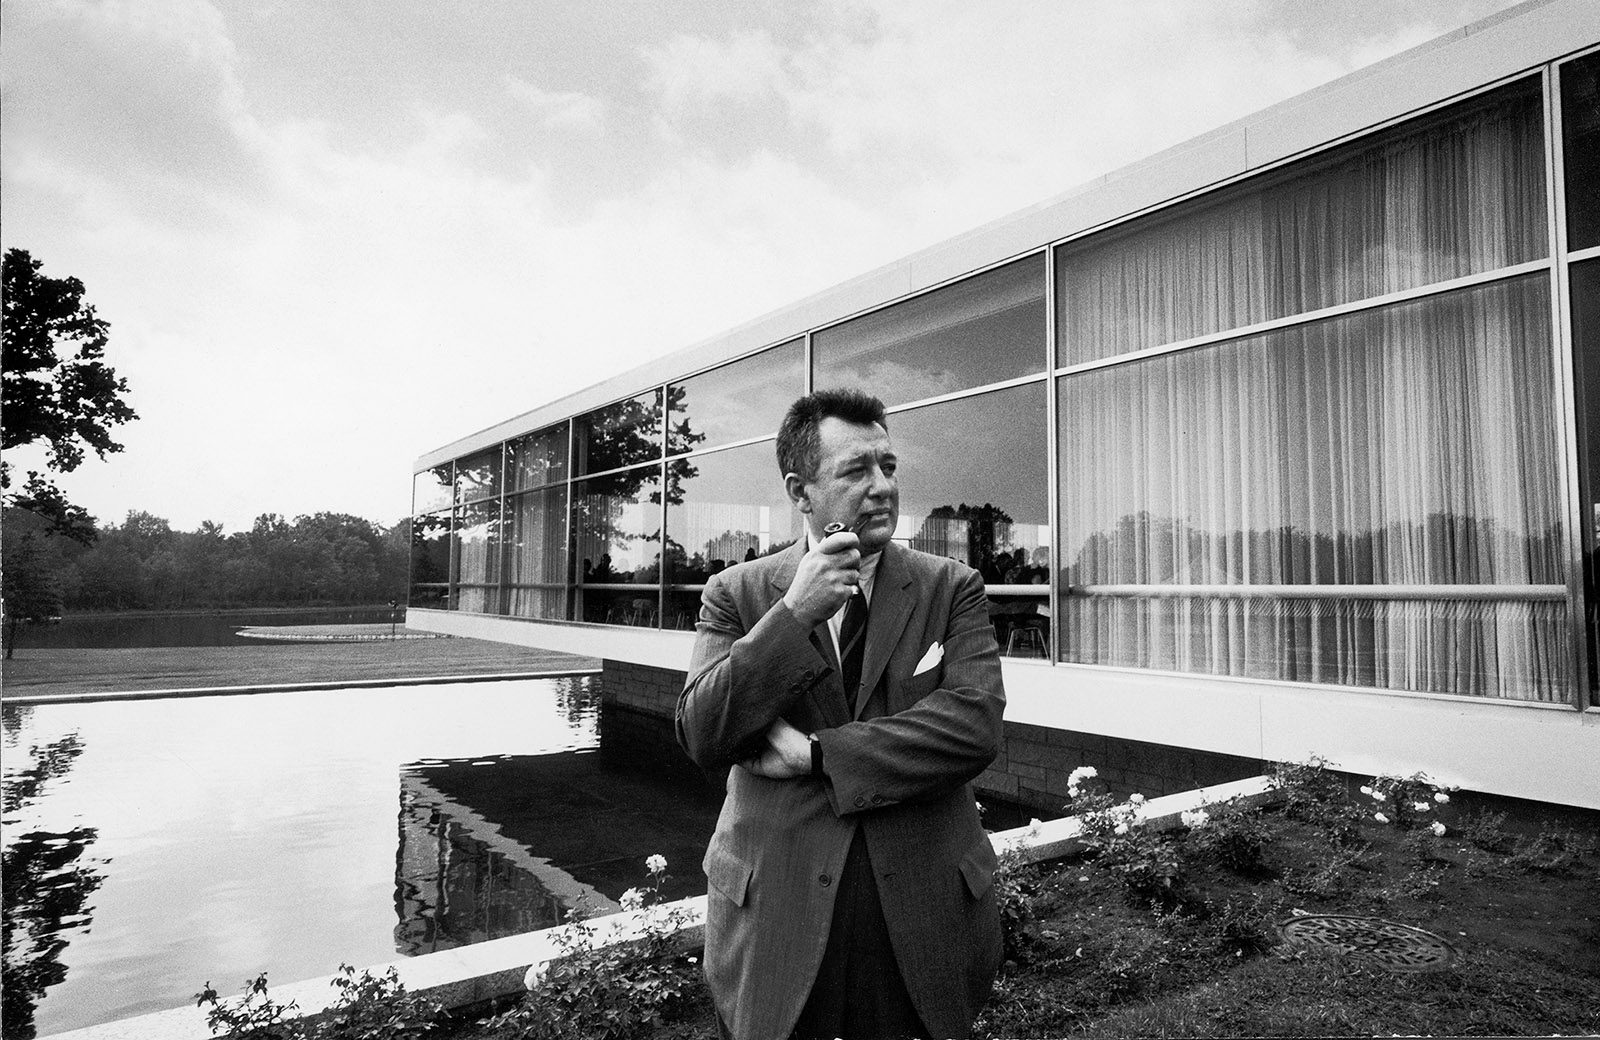 Gordon Bunshaft, 1957; behind him is the Connecticut General Life Insurance building, designed by Skidmore, Owings & Merrill, 1953–1957